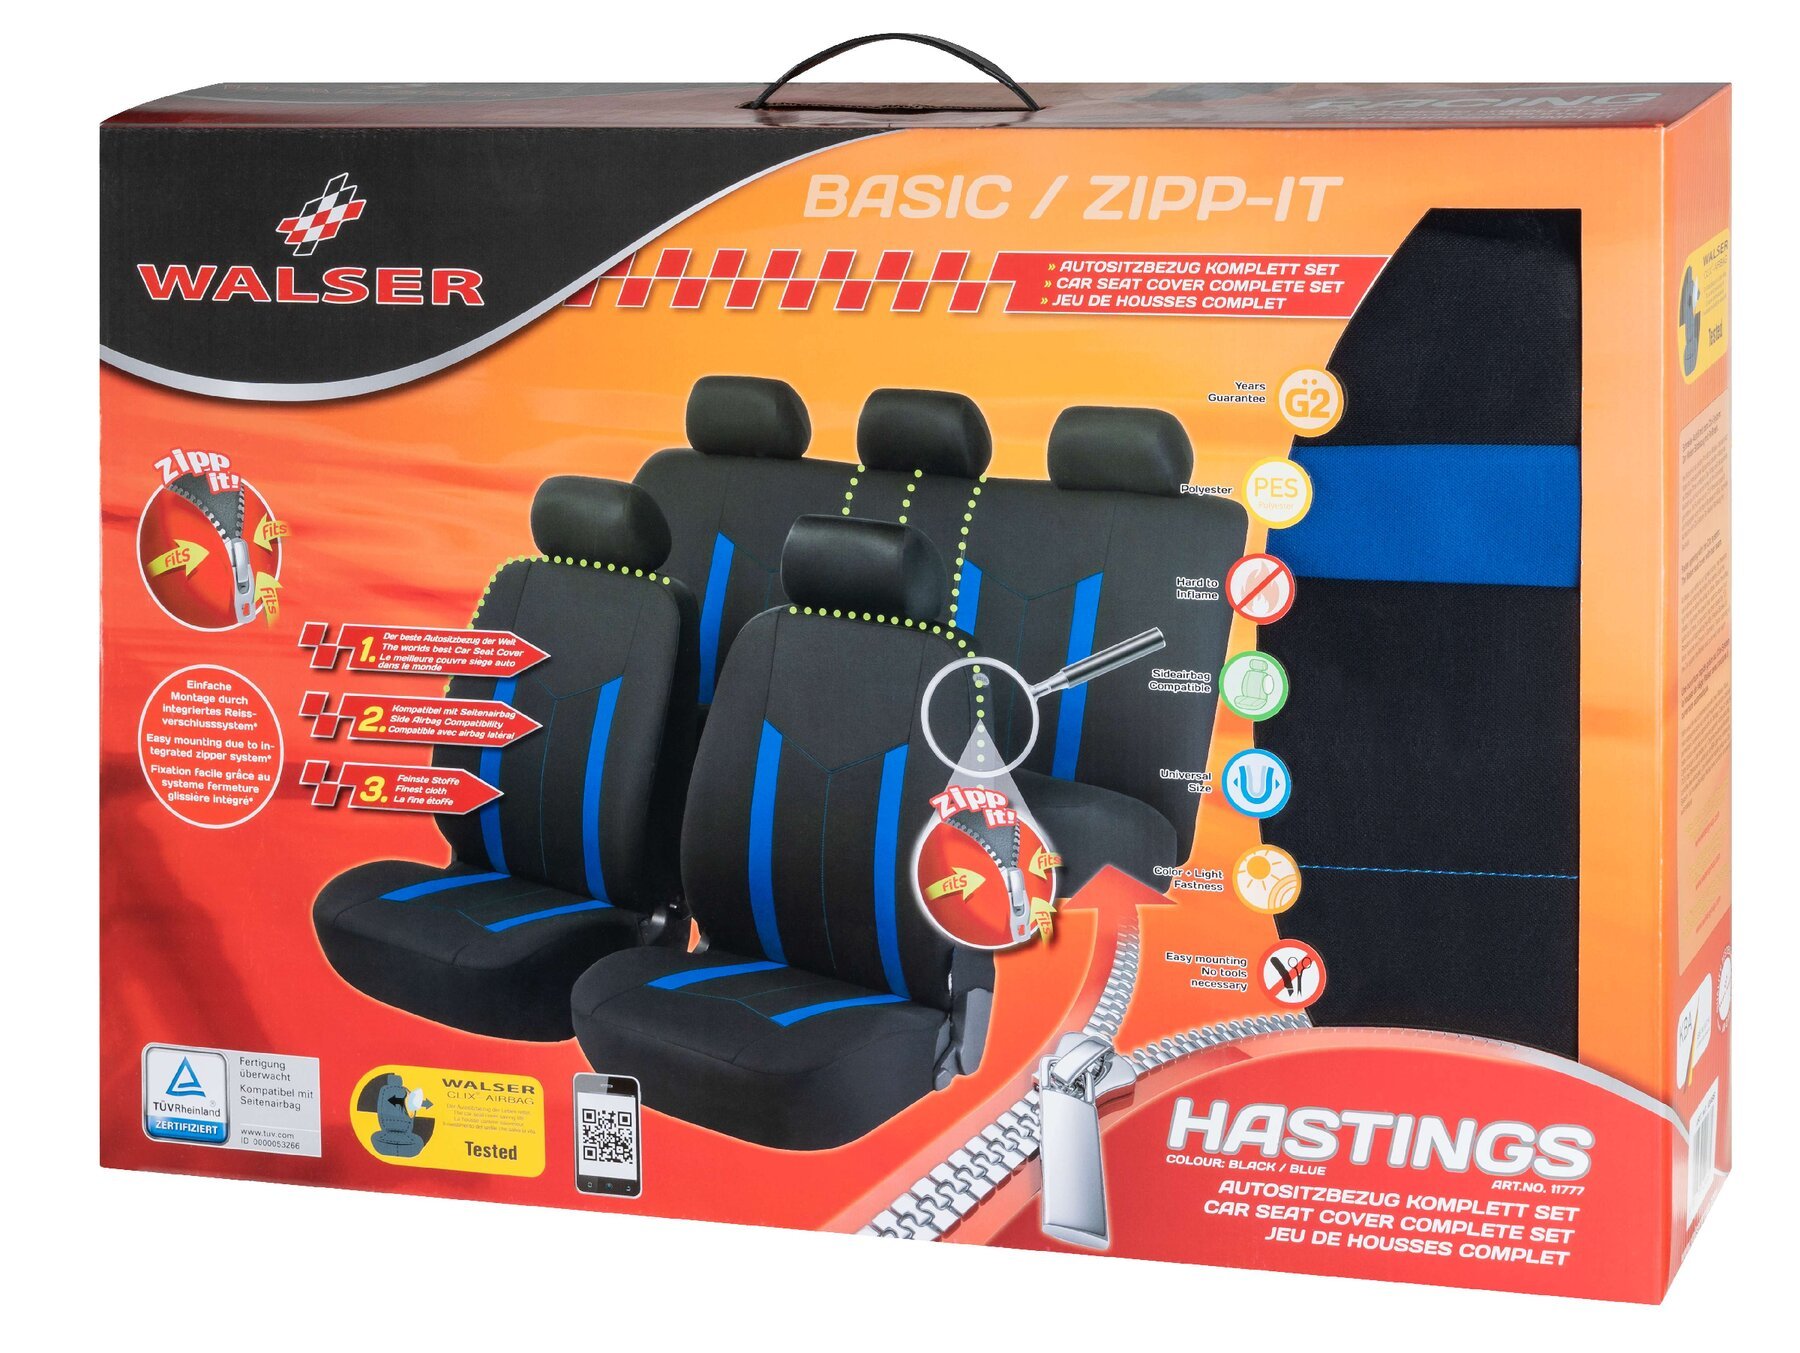 ZIPP-IT Basic Hastings blue car Seat covers with zipper system